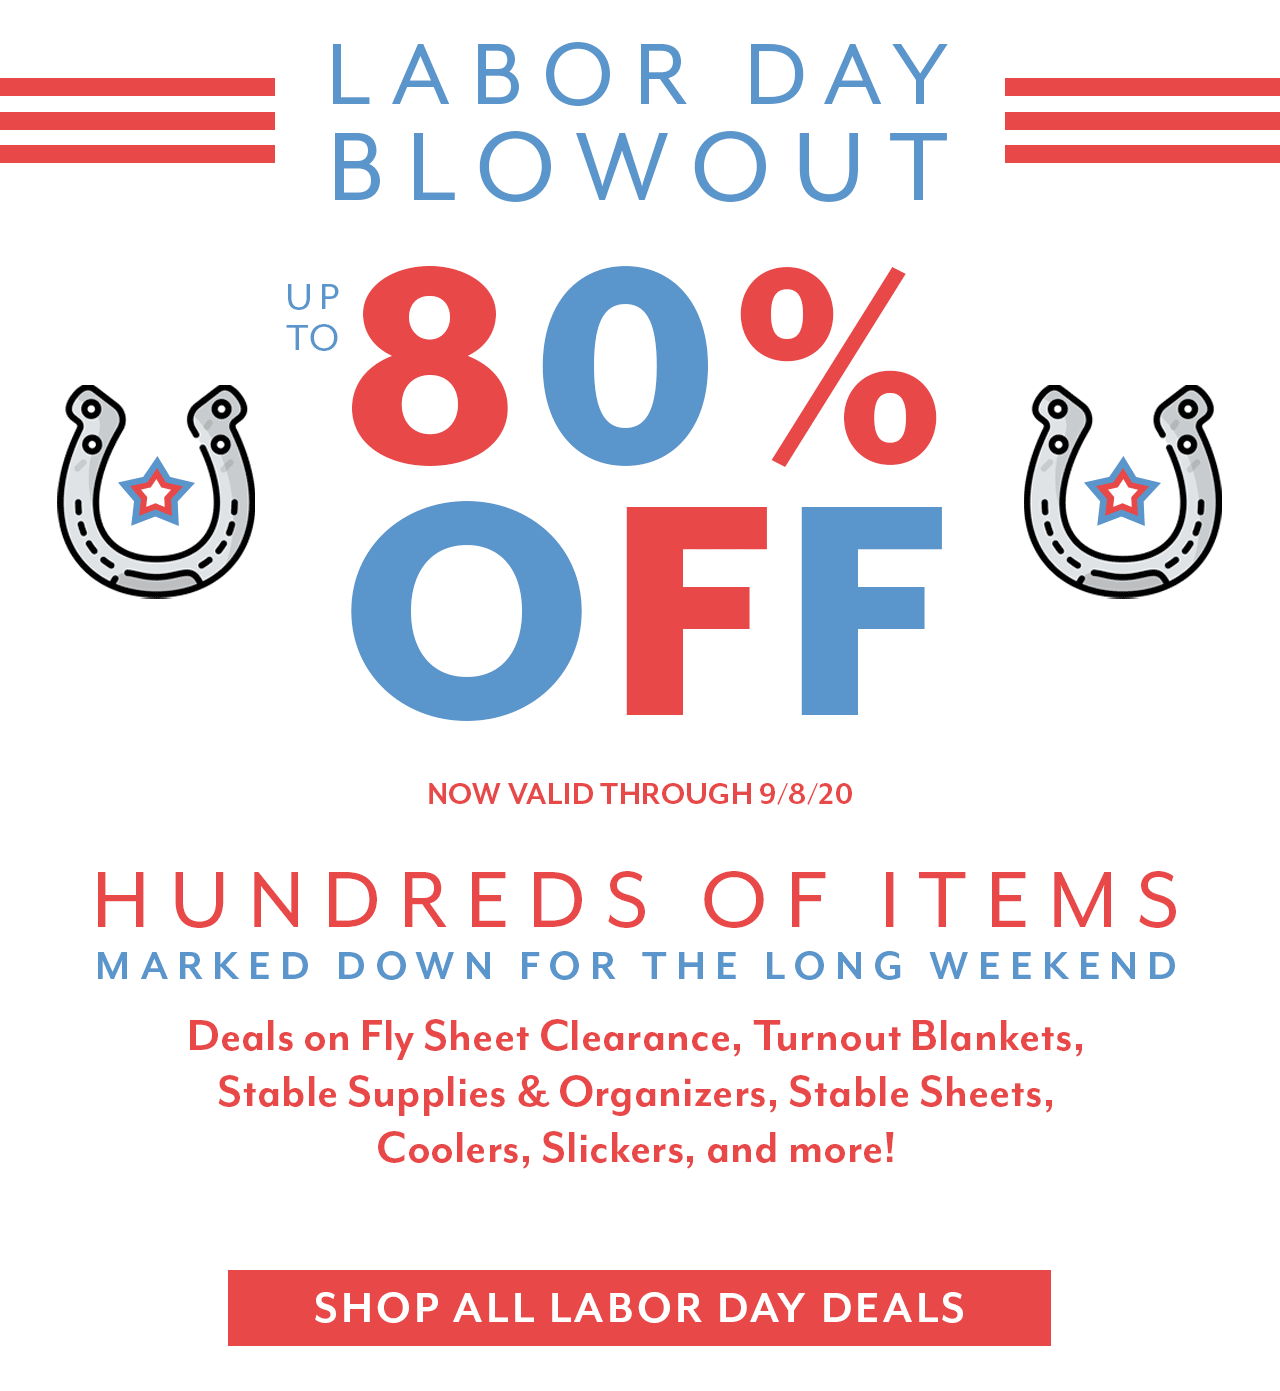 Labor Day Blowout: up to 80% off, extended until tonight.